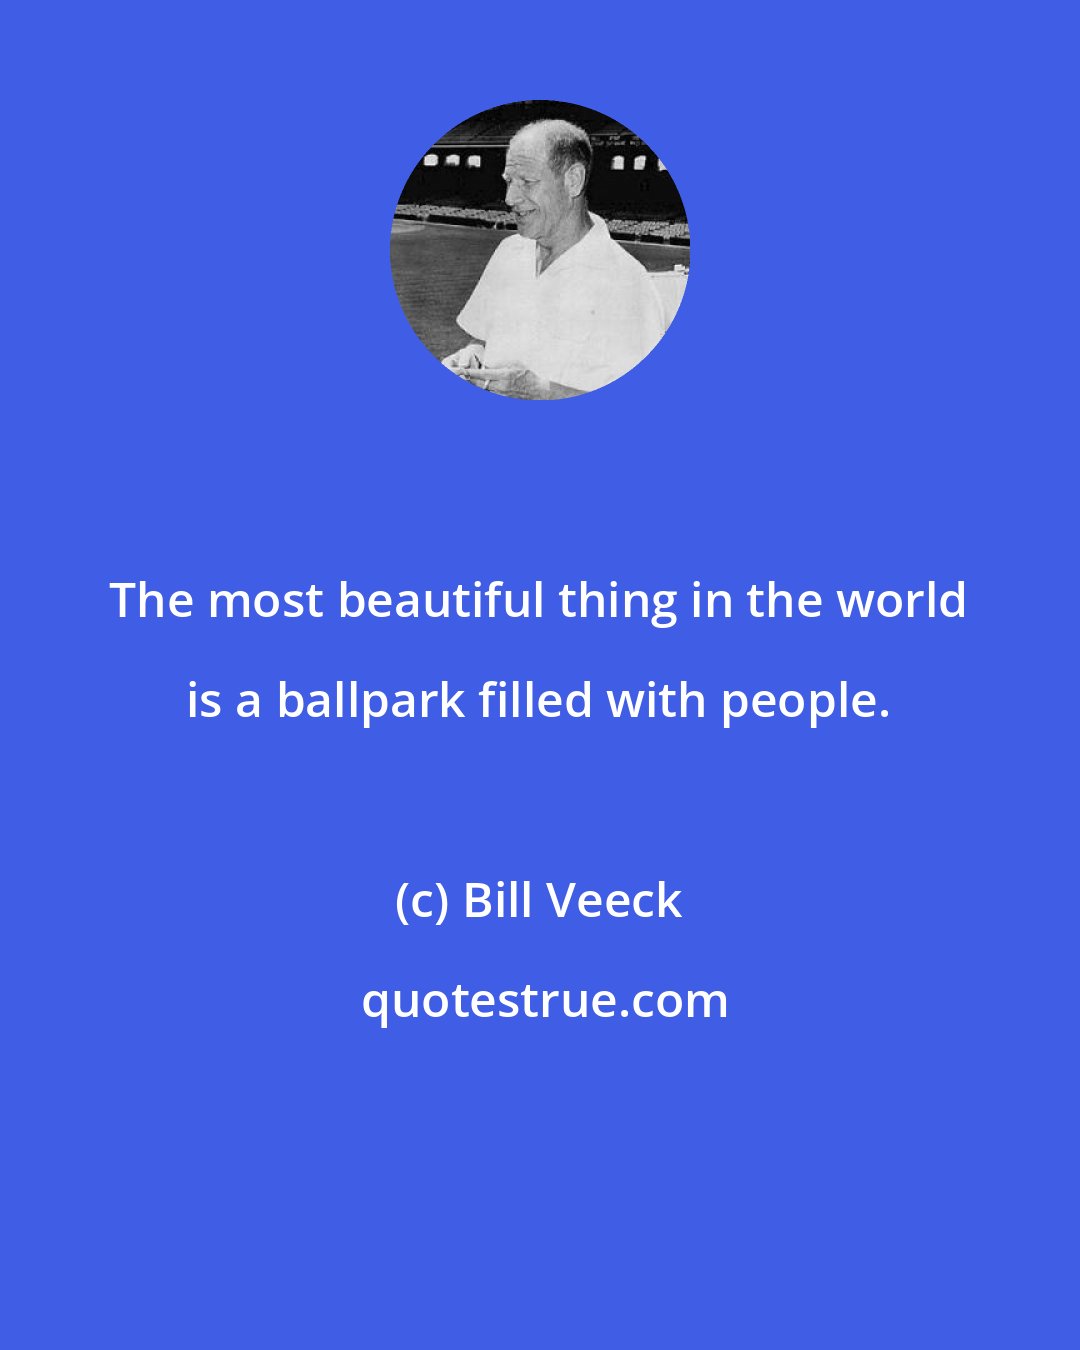 Bill Veeck: The most beautiful thing in the world is a ballpark filled with people.